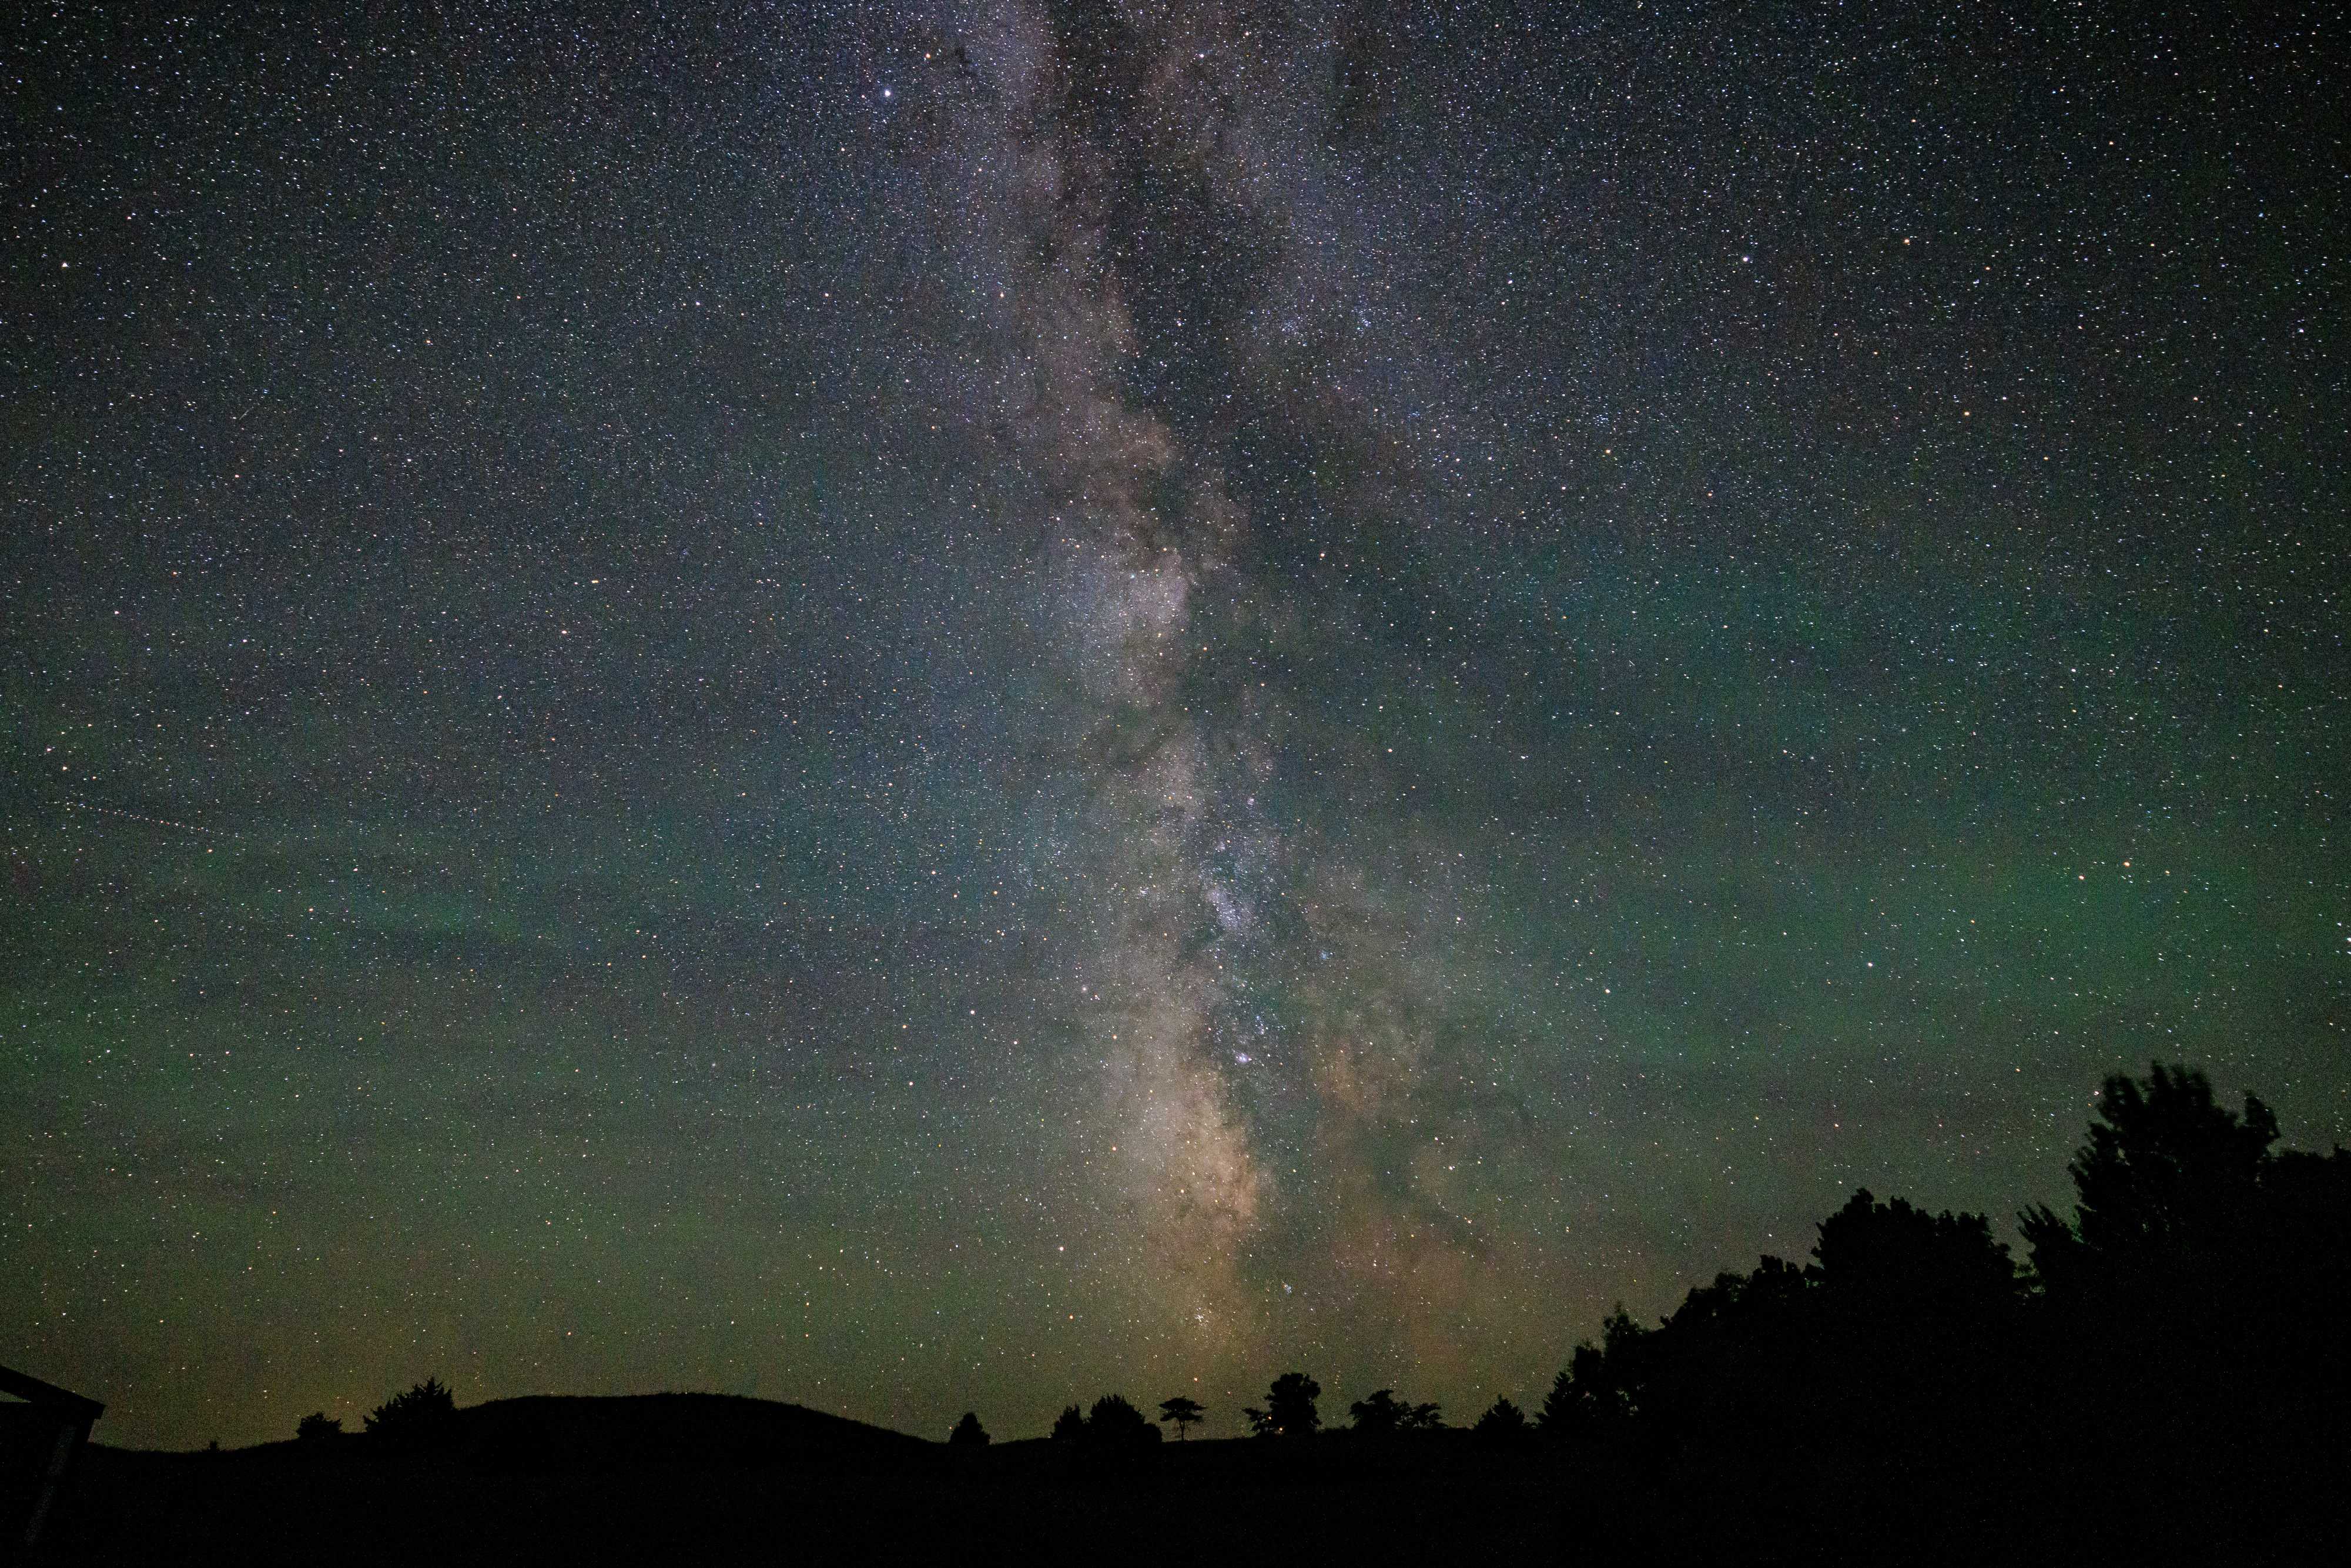 The Milky Way is visible rising from the tree-lined horizon into the dark of the night sky, a clear band of almost infinite stars dense in the sky. A faint green sheen overlays the photo, which is a unique phenomenon called skyglow, visible after dark in only the least light polluted skies on earth.